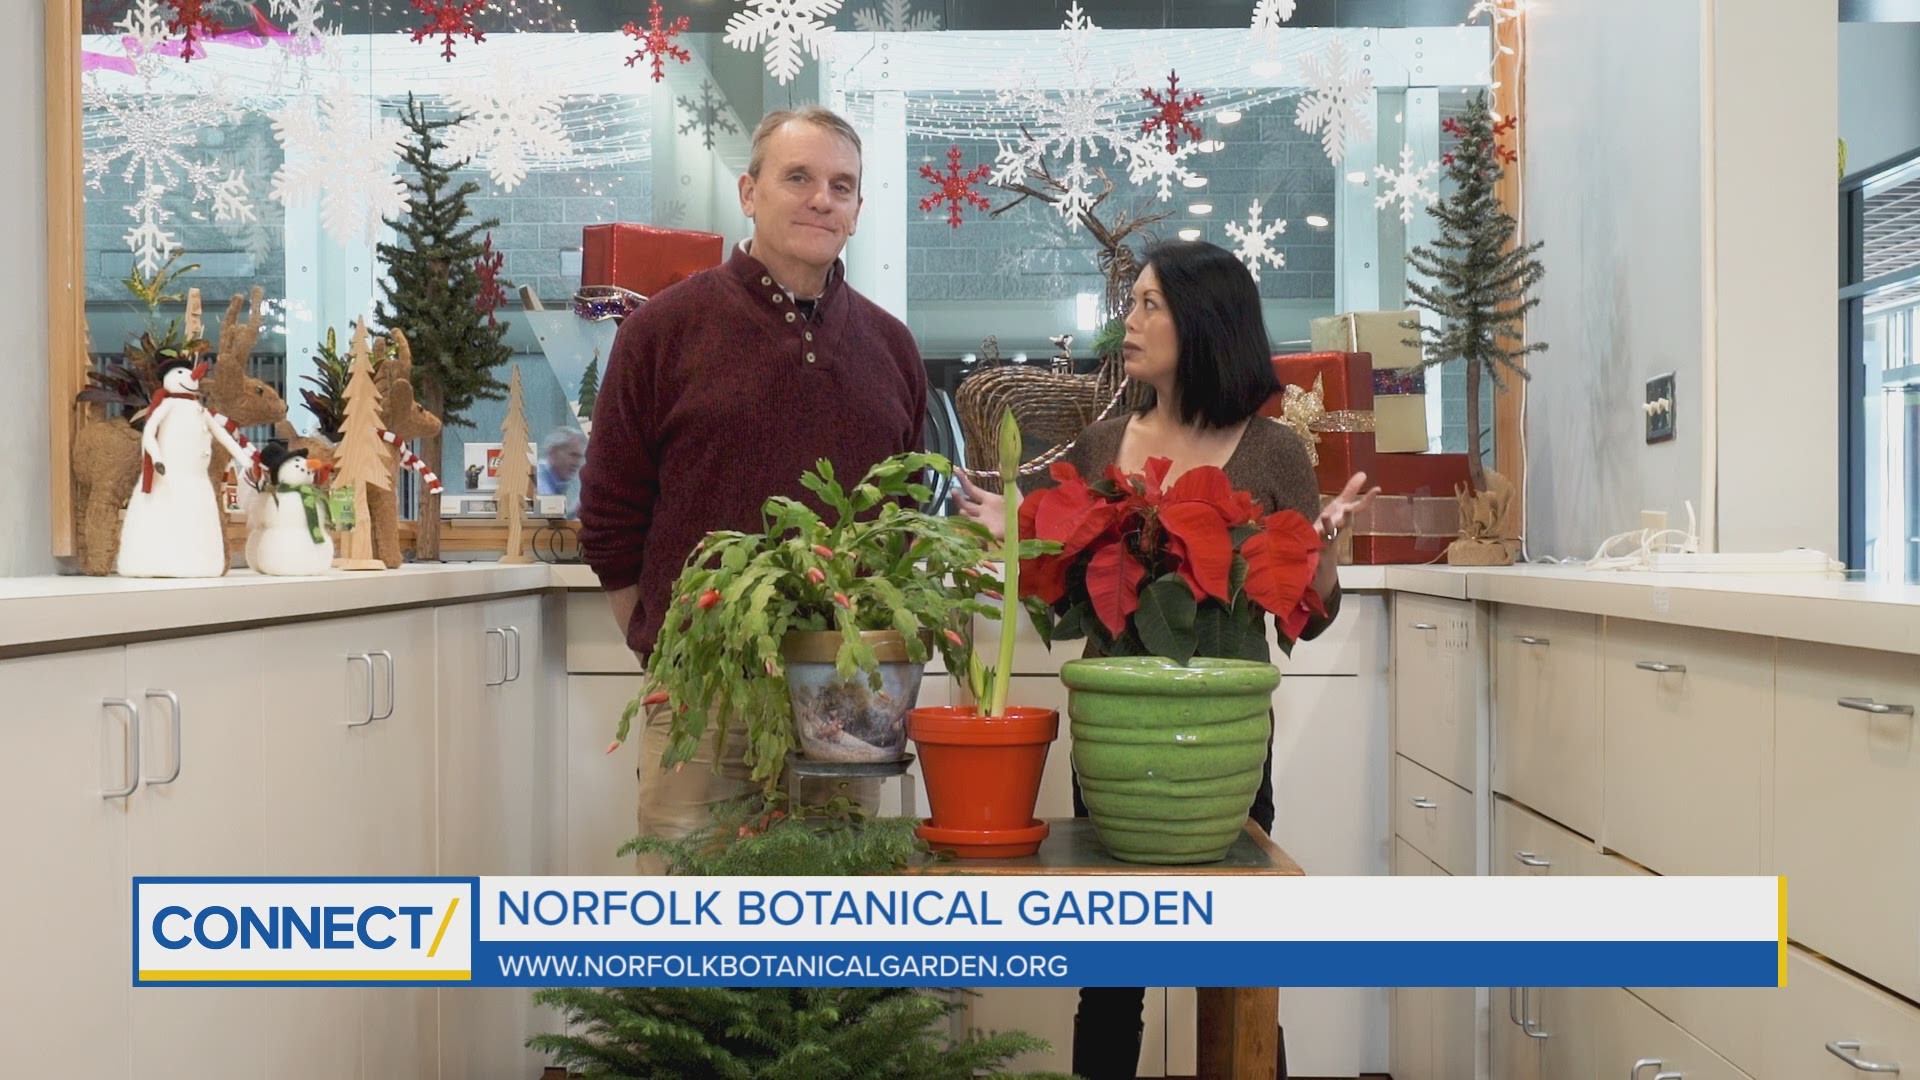 Christmas trees and poinsettias are most popular this time of year, but Norfolk Botanical Garden showed us other plants that are good for the Holiday season.